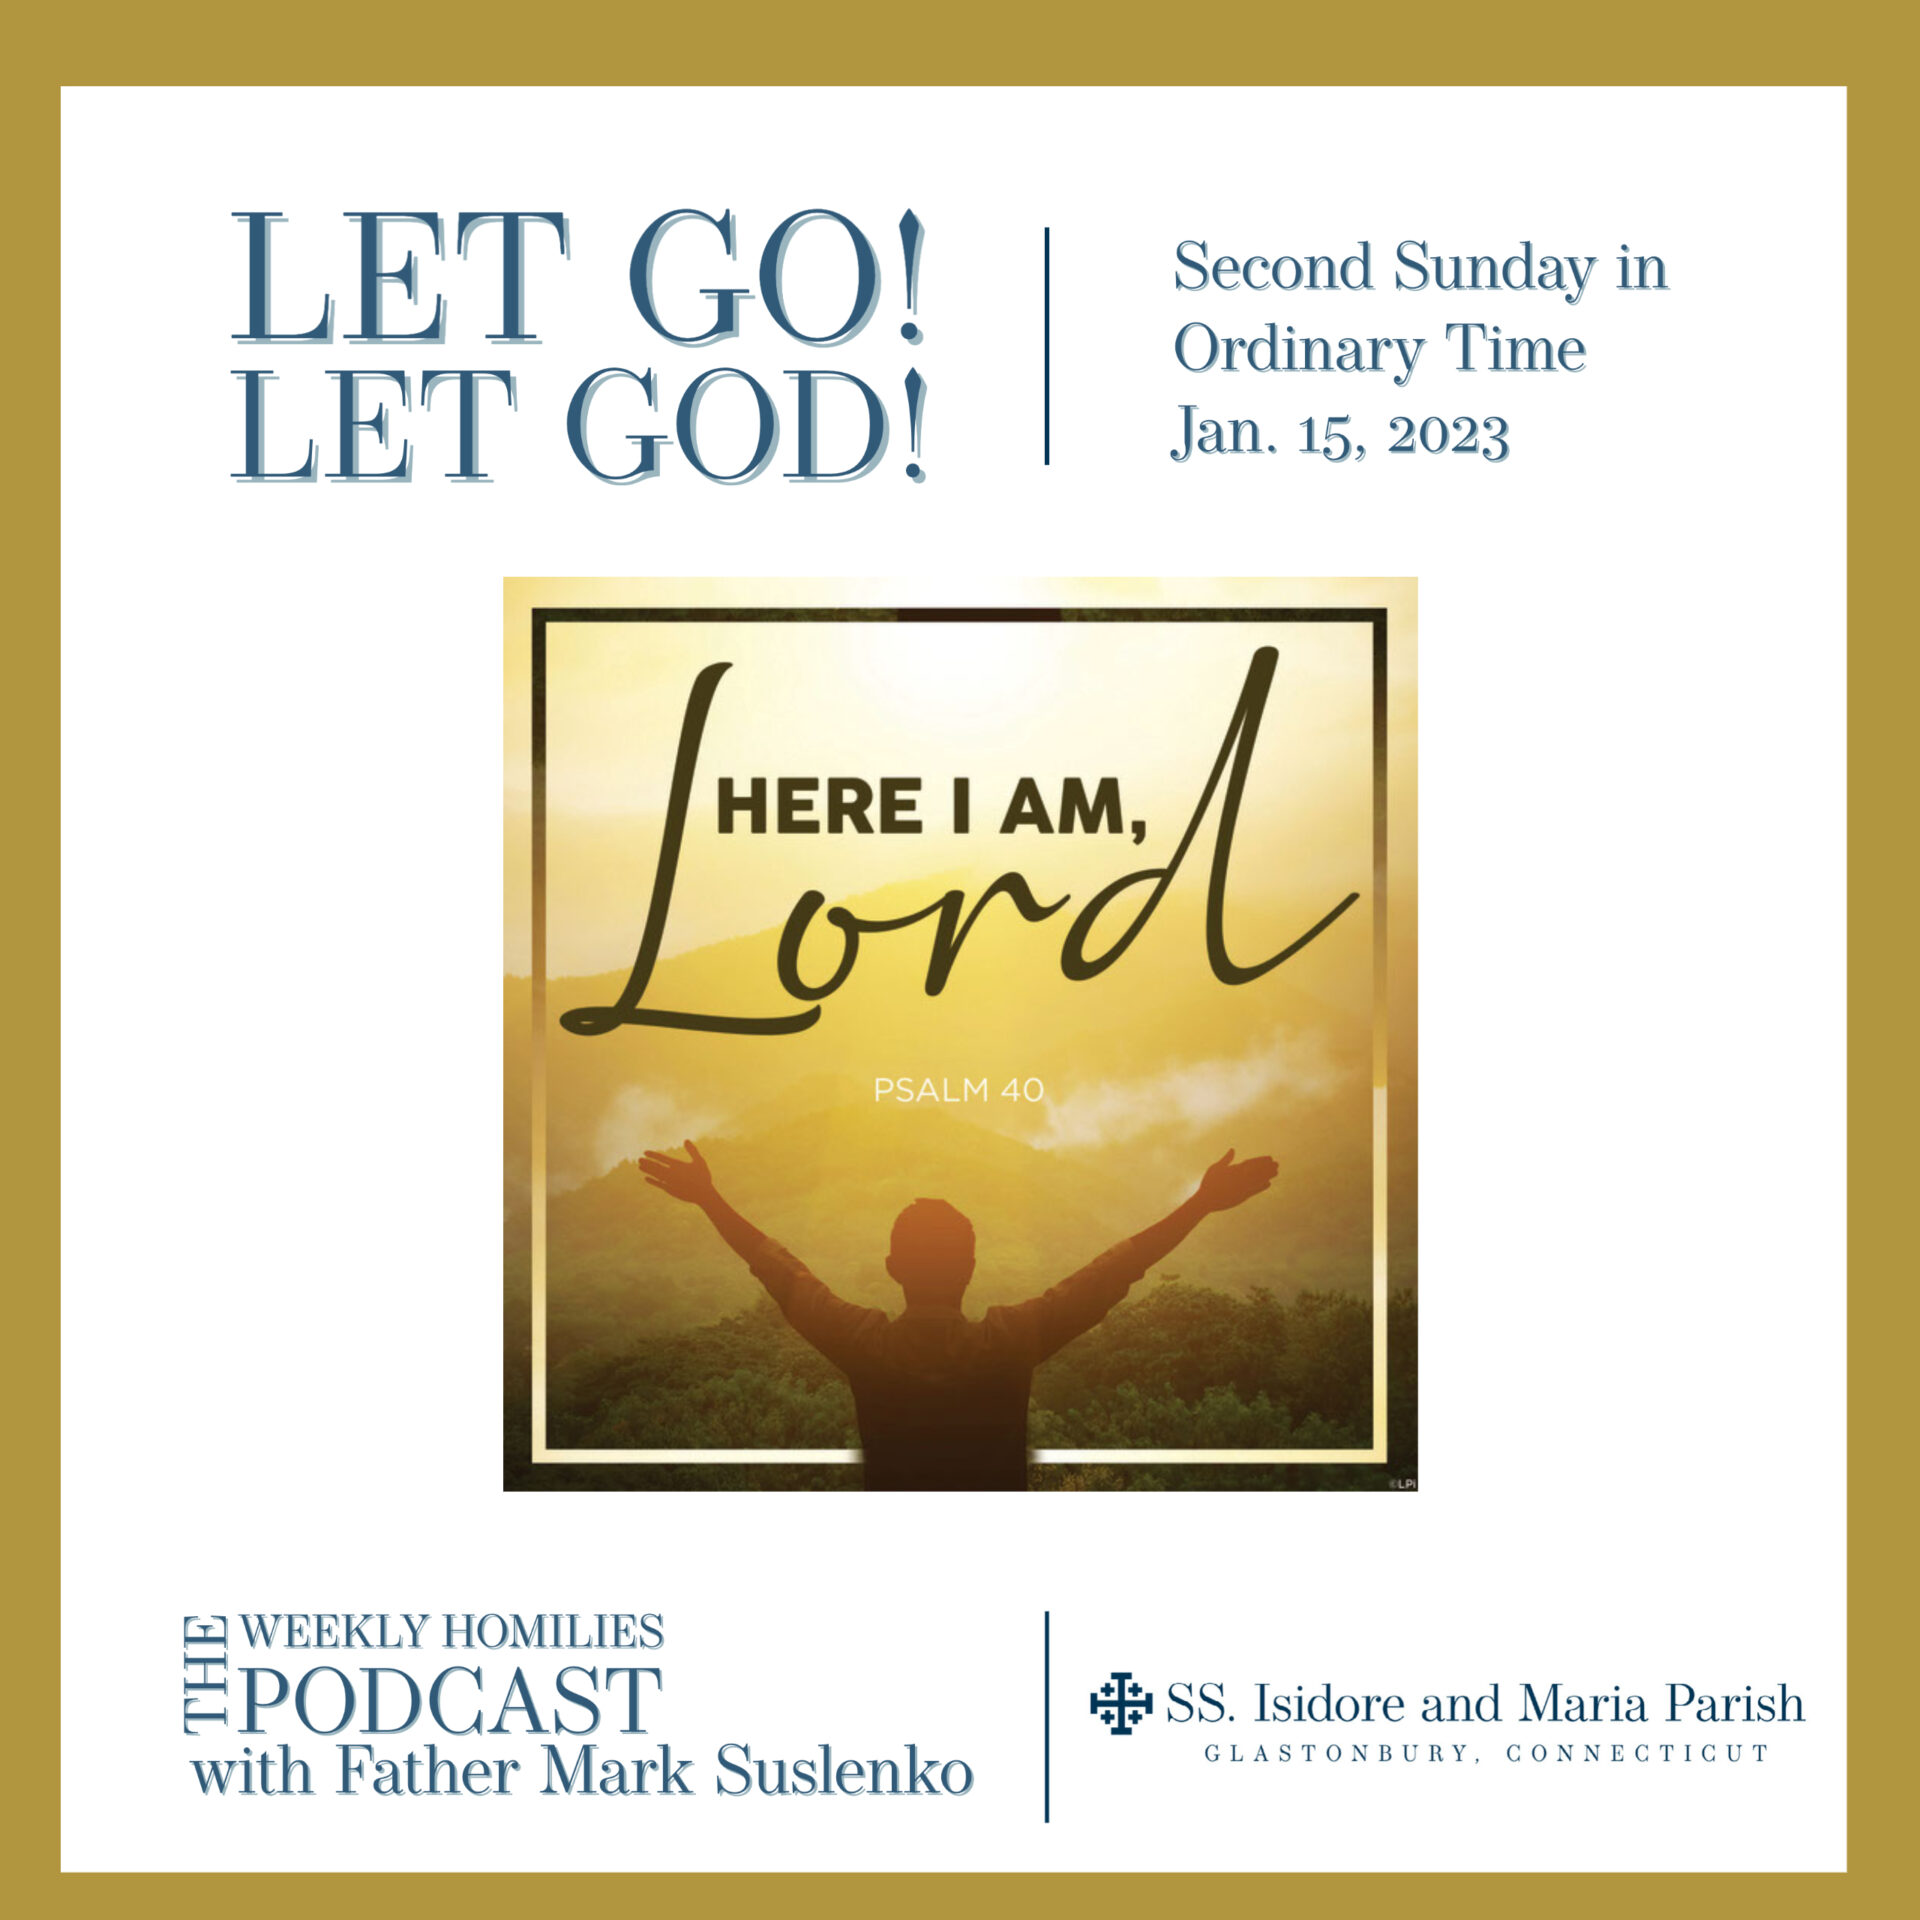 PODCAST: Let Go! Let God! (Here I am, Lord)